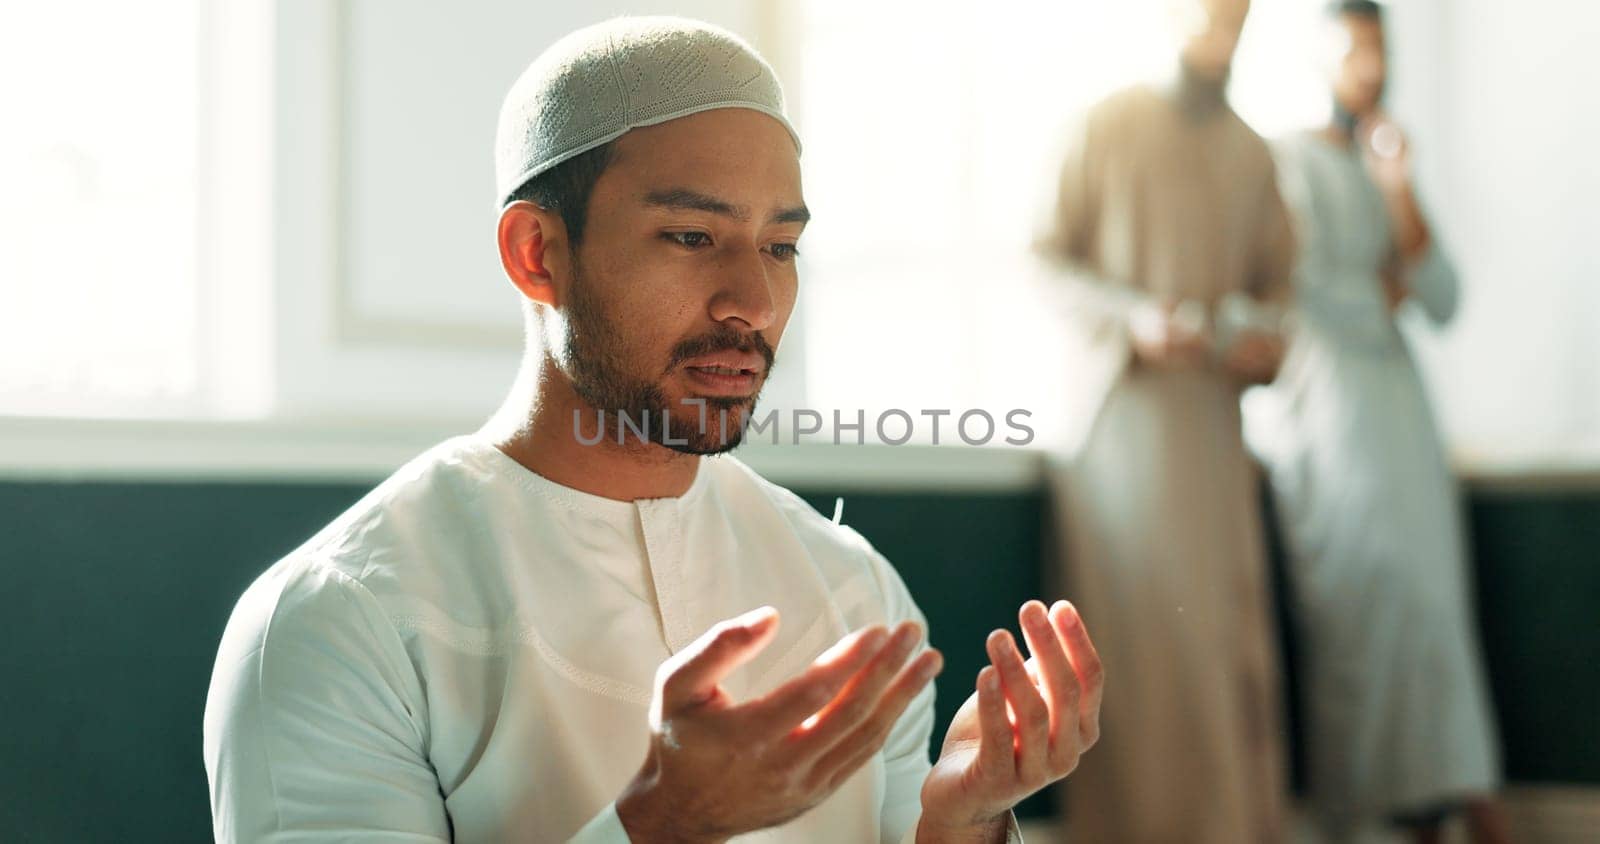 Islam, prayer and man in mosque with faith, mindfulness and gratitude with commitment to faith. Worship, religion and Muslim person in holy temple praise, spiritual teaching and learning with peace